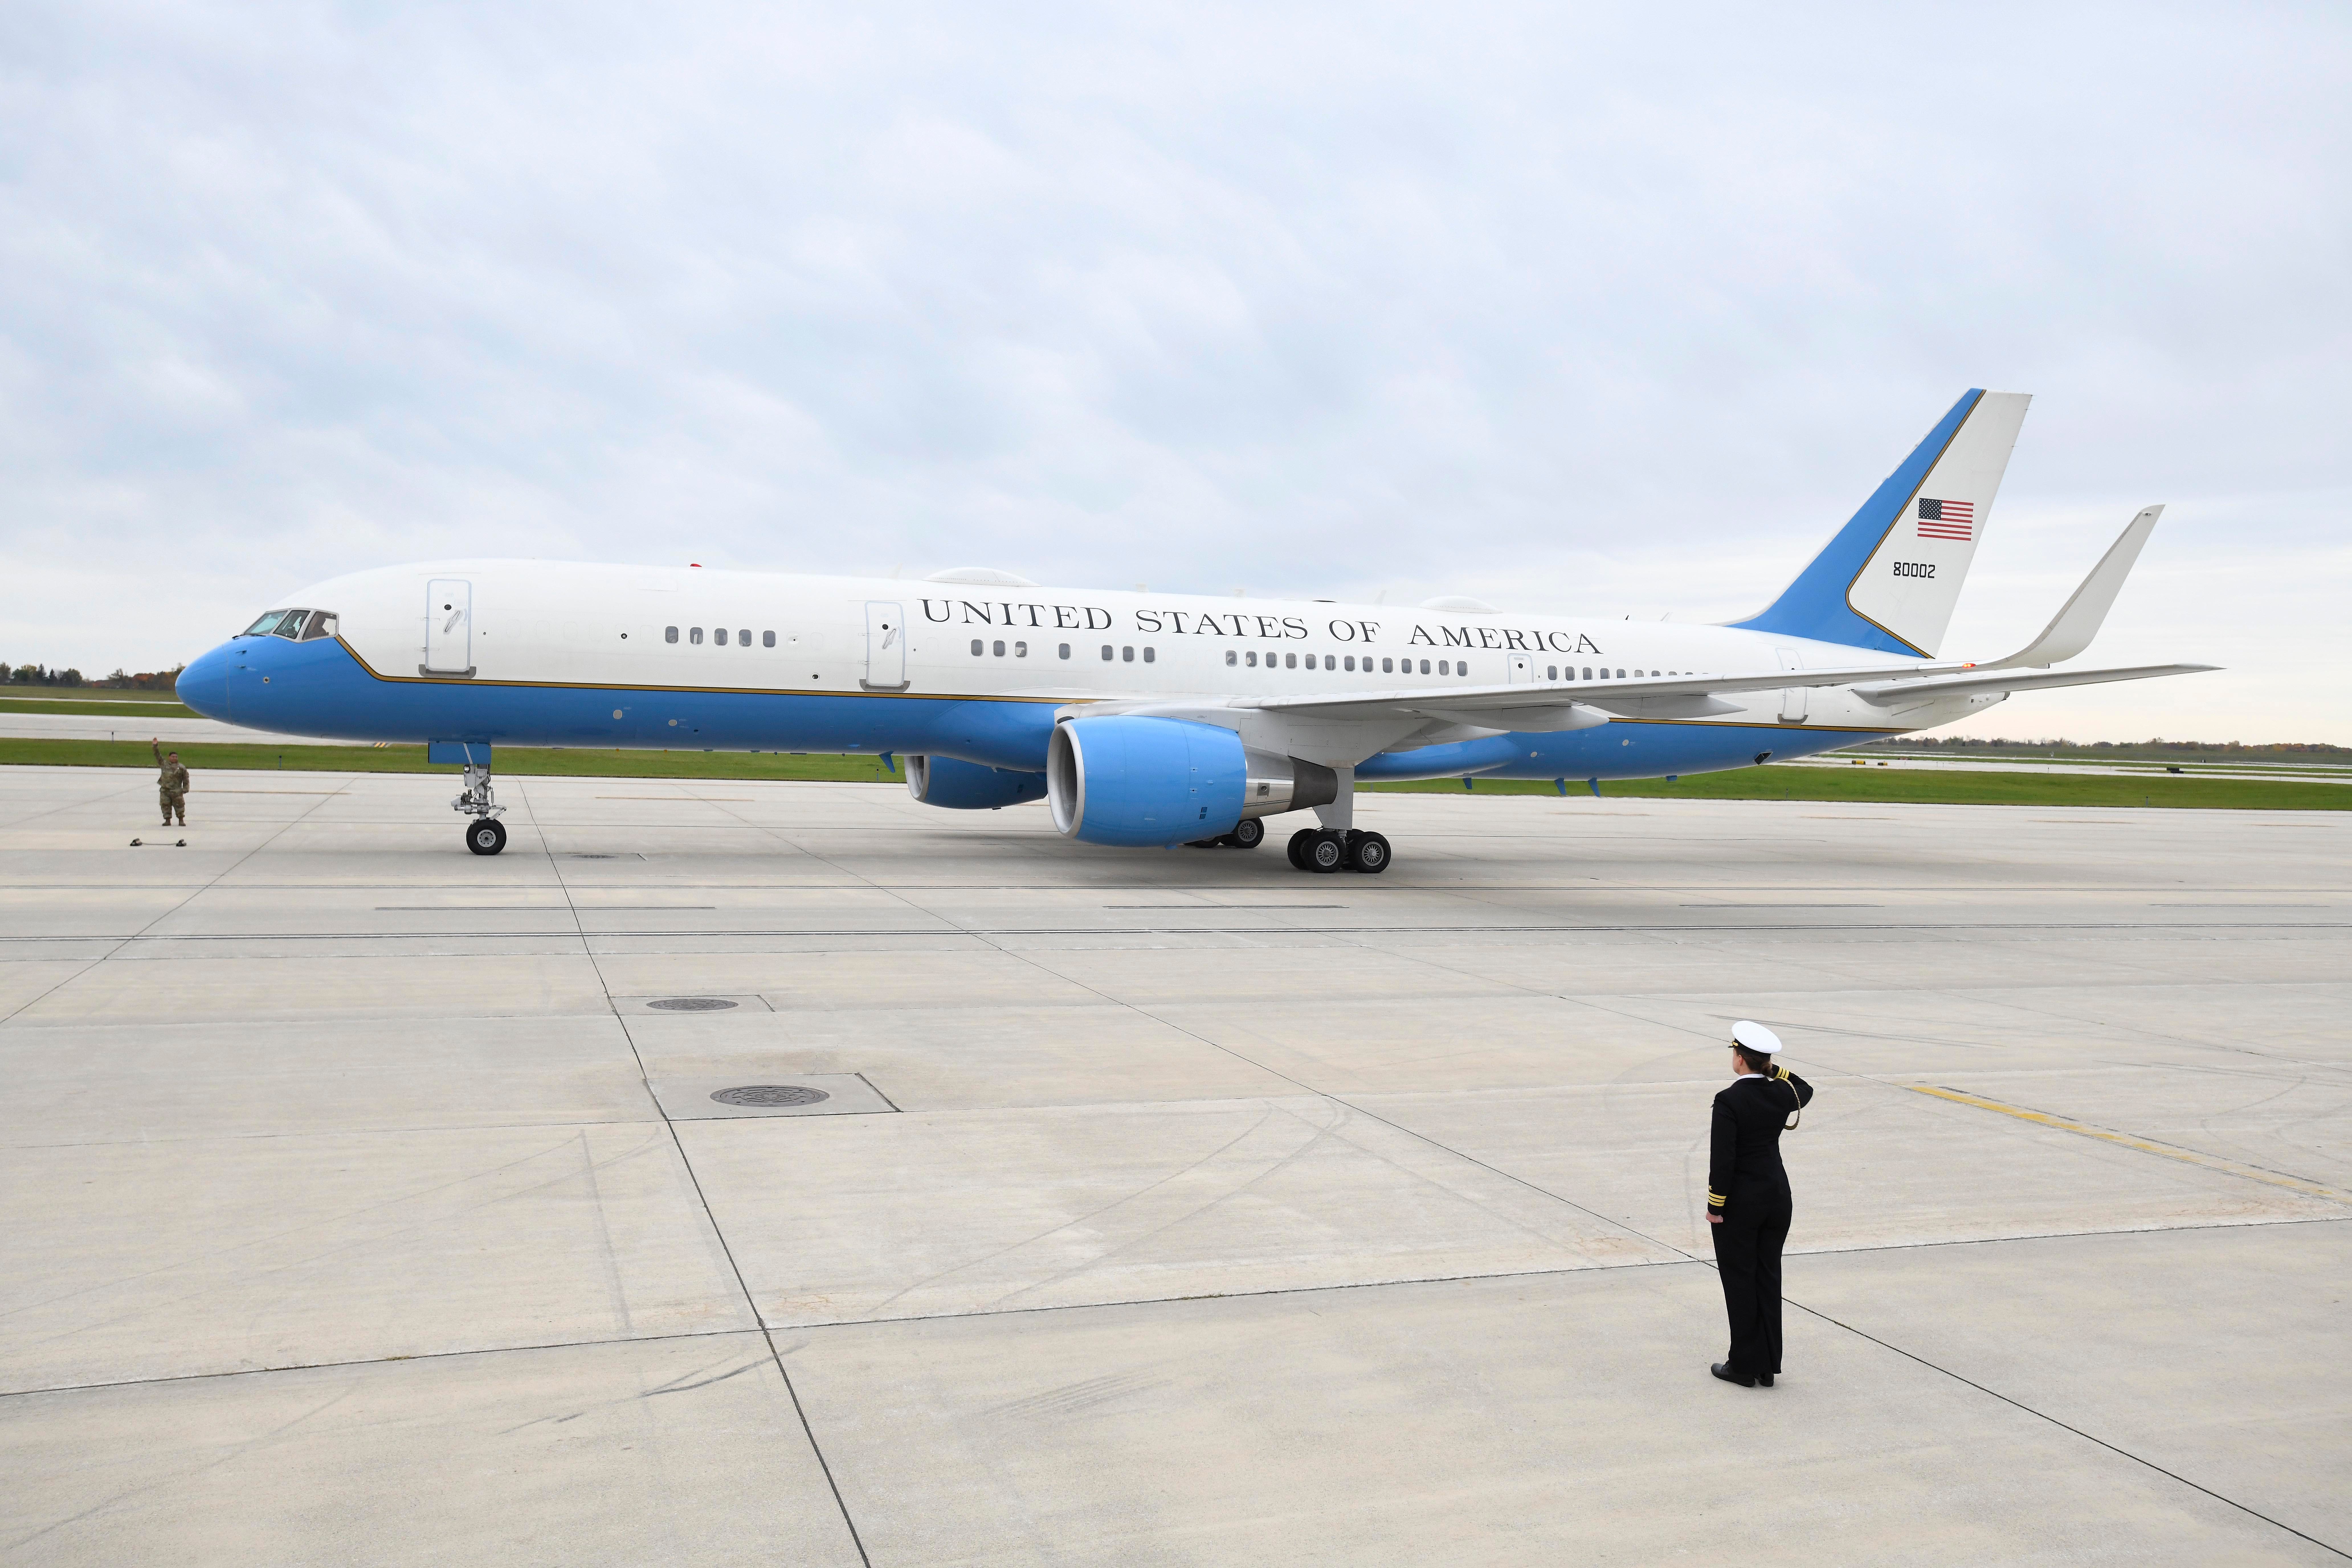 Air Force 2 lands at Gerald R. Ford International Airport with Vice President Mike Pence for a campaign stop in Grand Rapids, Michigan on October 14, 2020.